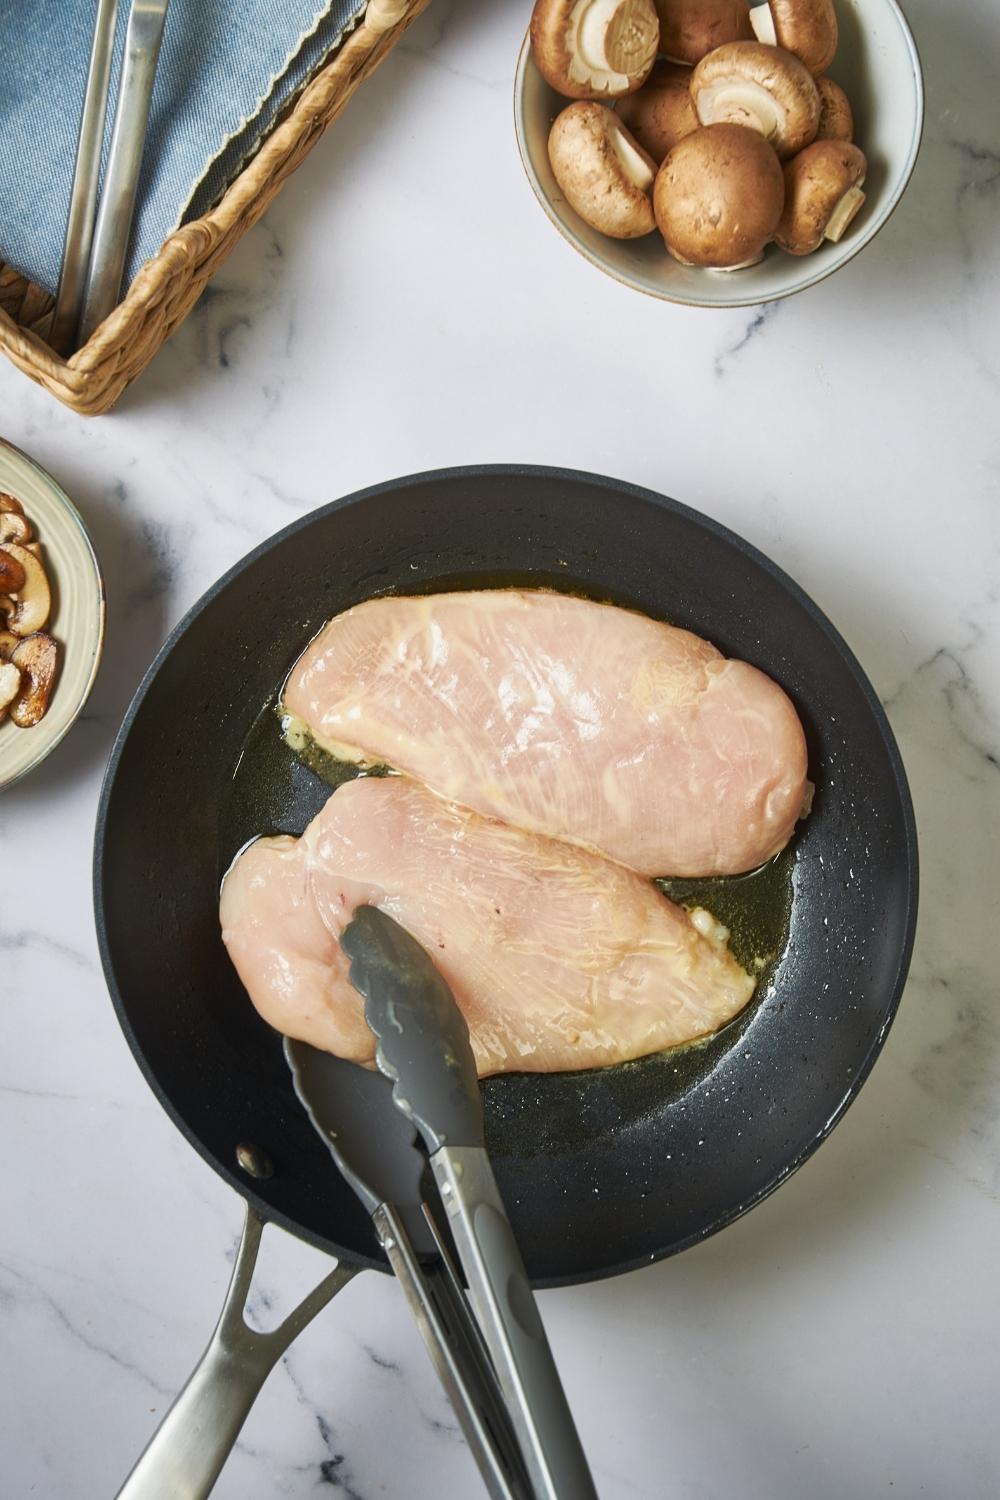 Skillet with raw chicken breast being turned over with a pair of tongs.